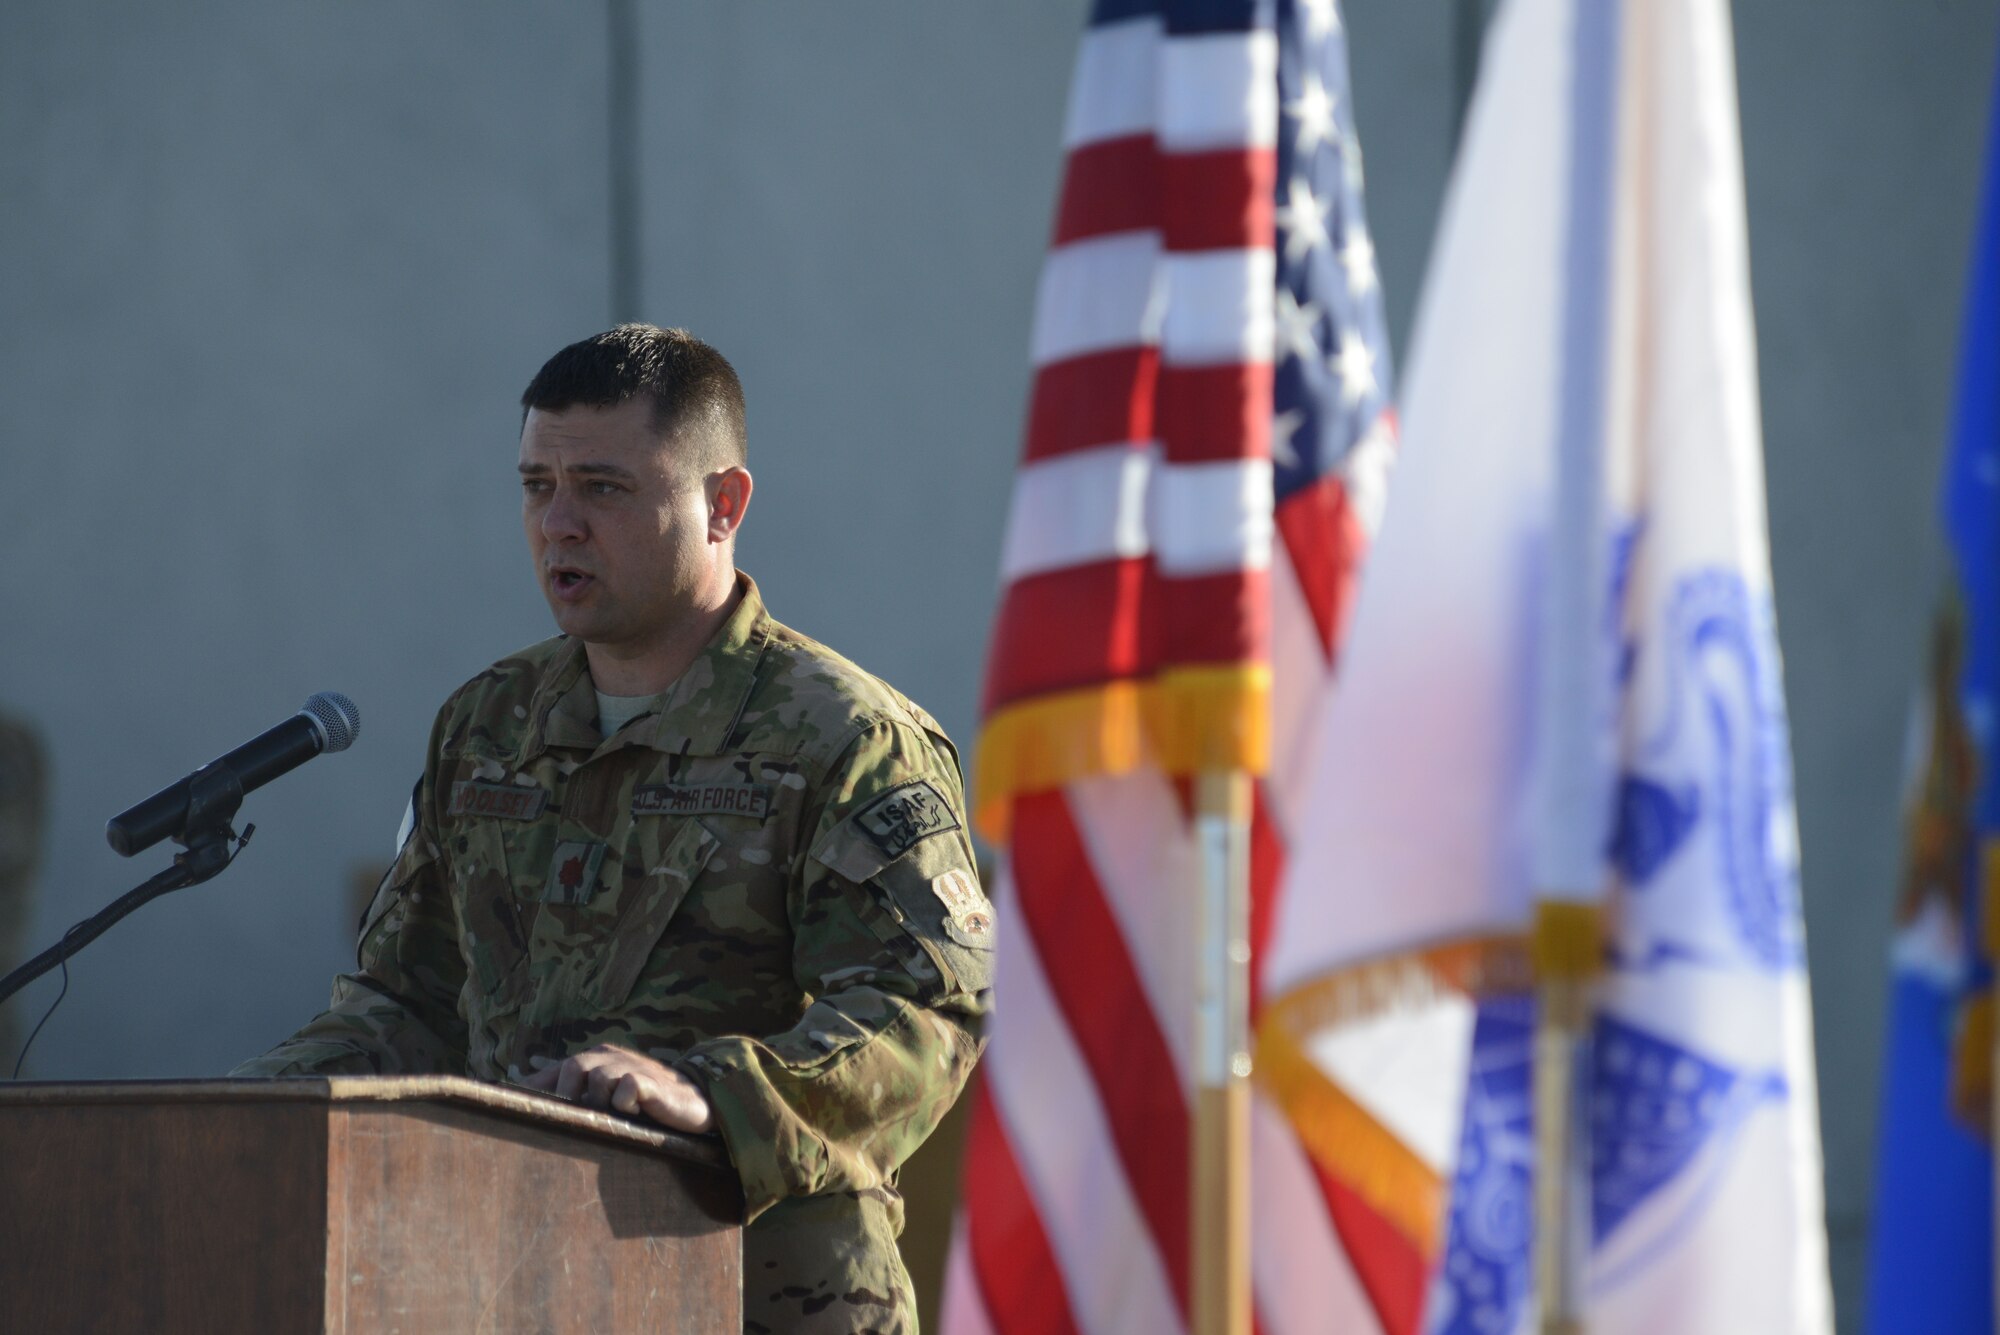 U.S. Air Force Maj. Tanner Woolsey, 4th Expeditionary Reconnaissance Squadron commander, speaks during the MC-12W transition of authority ceremony at Bagram Airfield, Afghanistan Oct. 1, 2014. The 4 ERS inactivated and Joint Task Force Thor is now the lead for the MC-12W mission. (U.S. Air Force photo by Master Sgt. Cohen A. Young/Released)